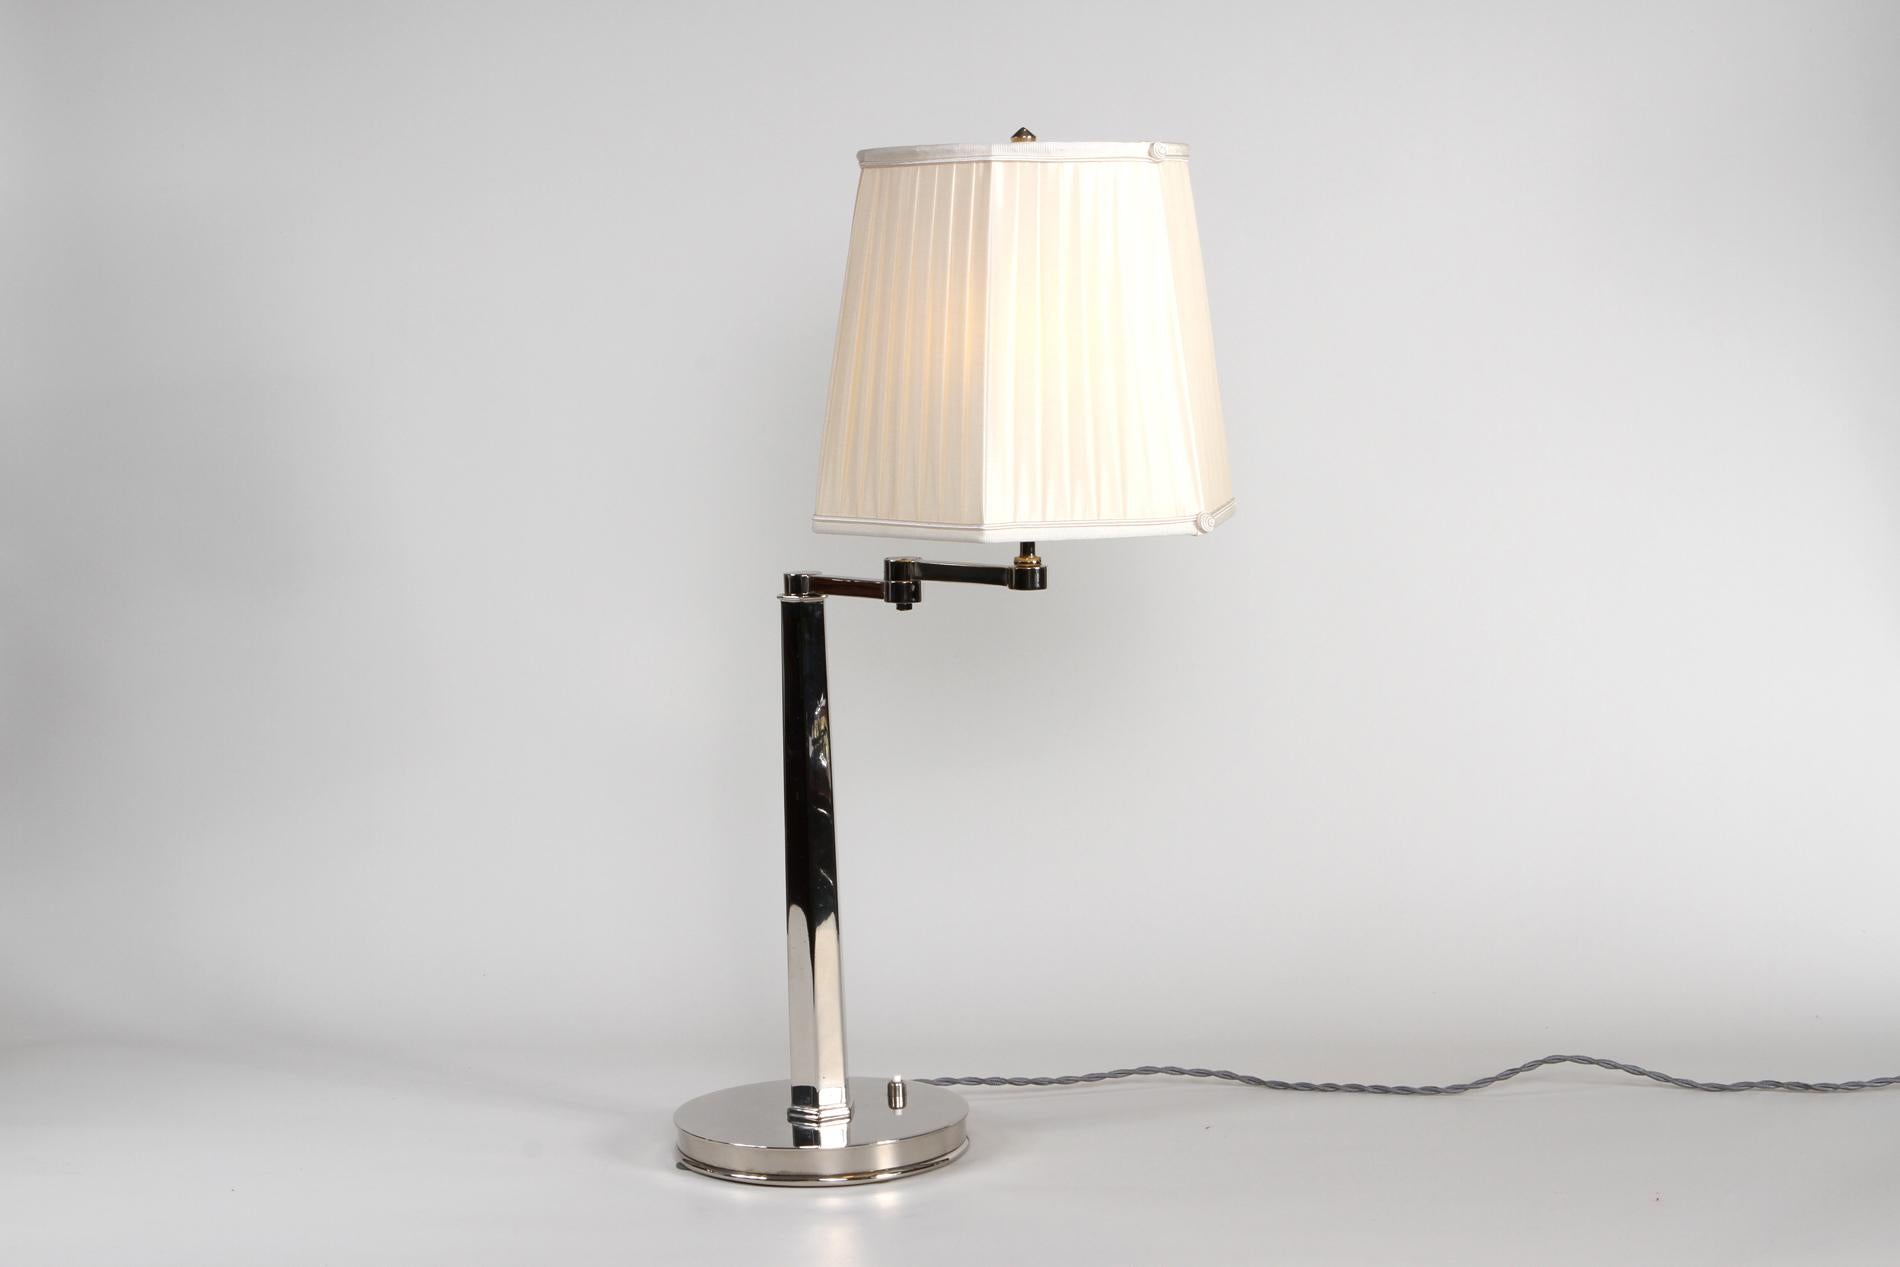 Original table lamp by Maison Dominique, modernist style in nickeled bronze and custom made creamy lampshade. The lamp is great for desks or nightstands as it's totally articulated and we can play with the shades of the light, creating a really